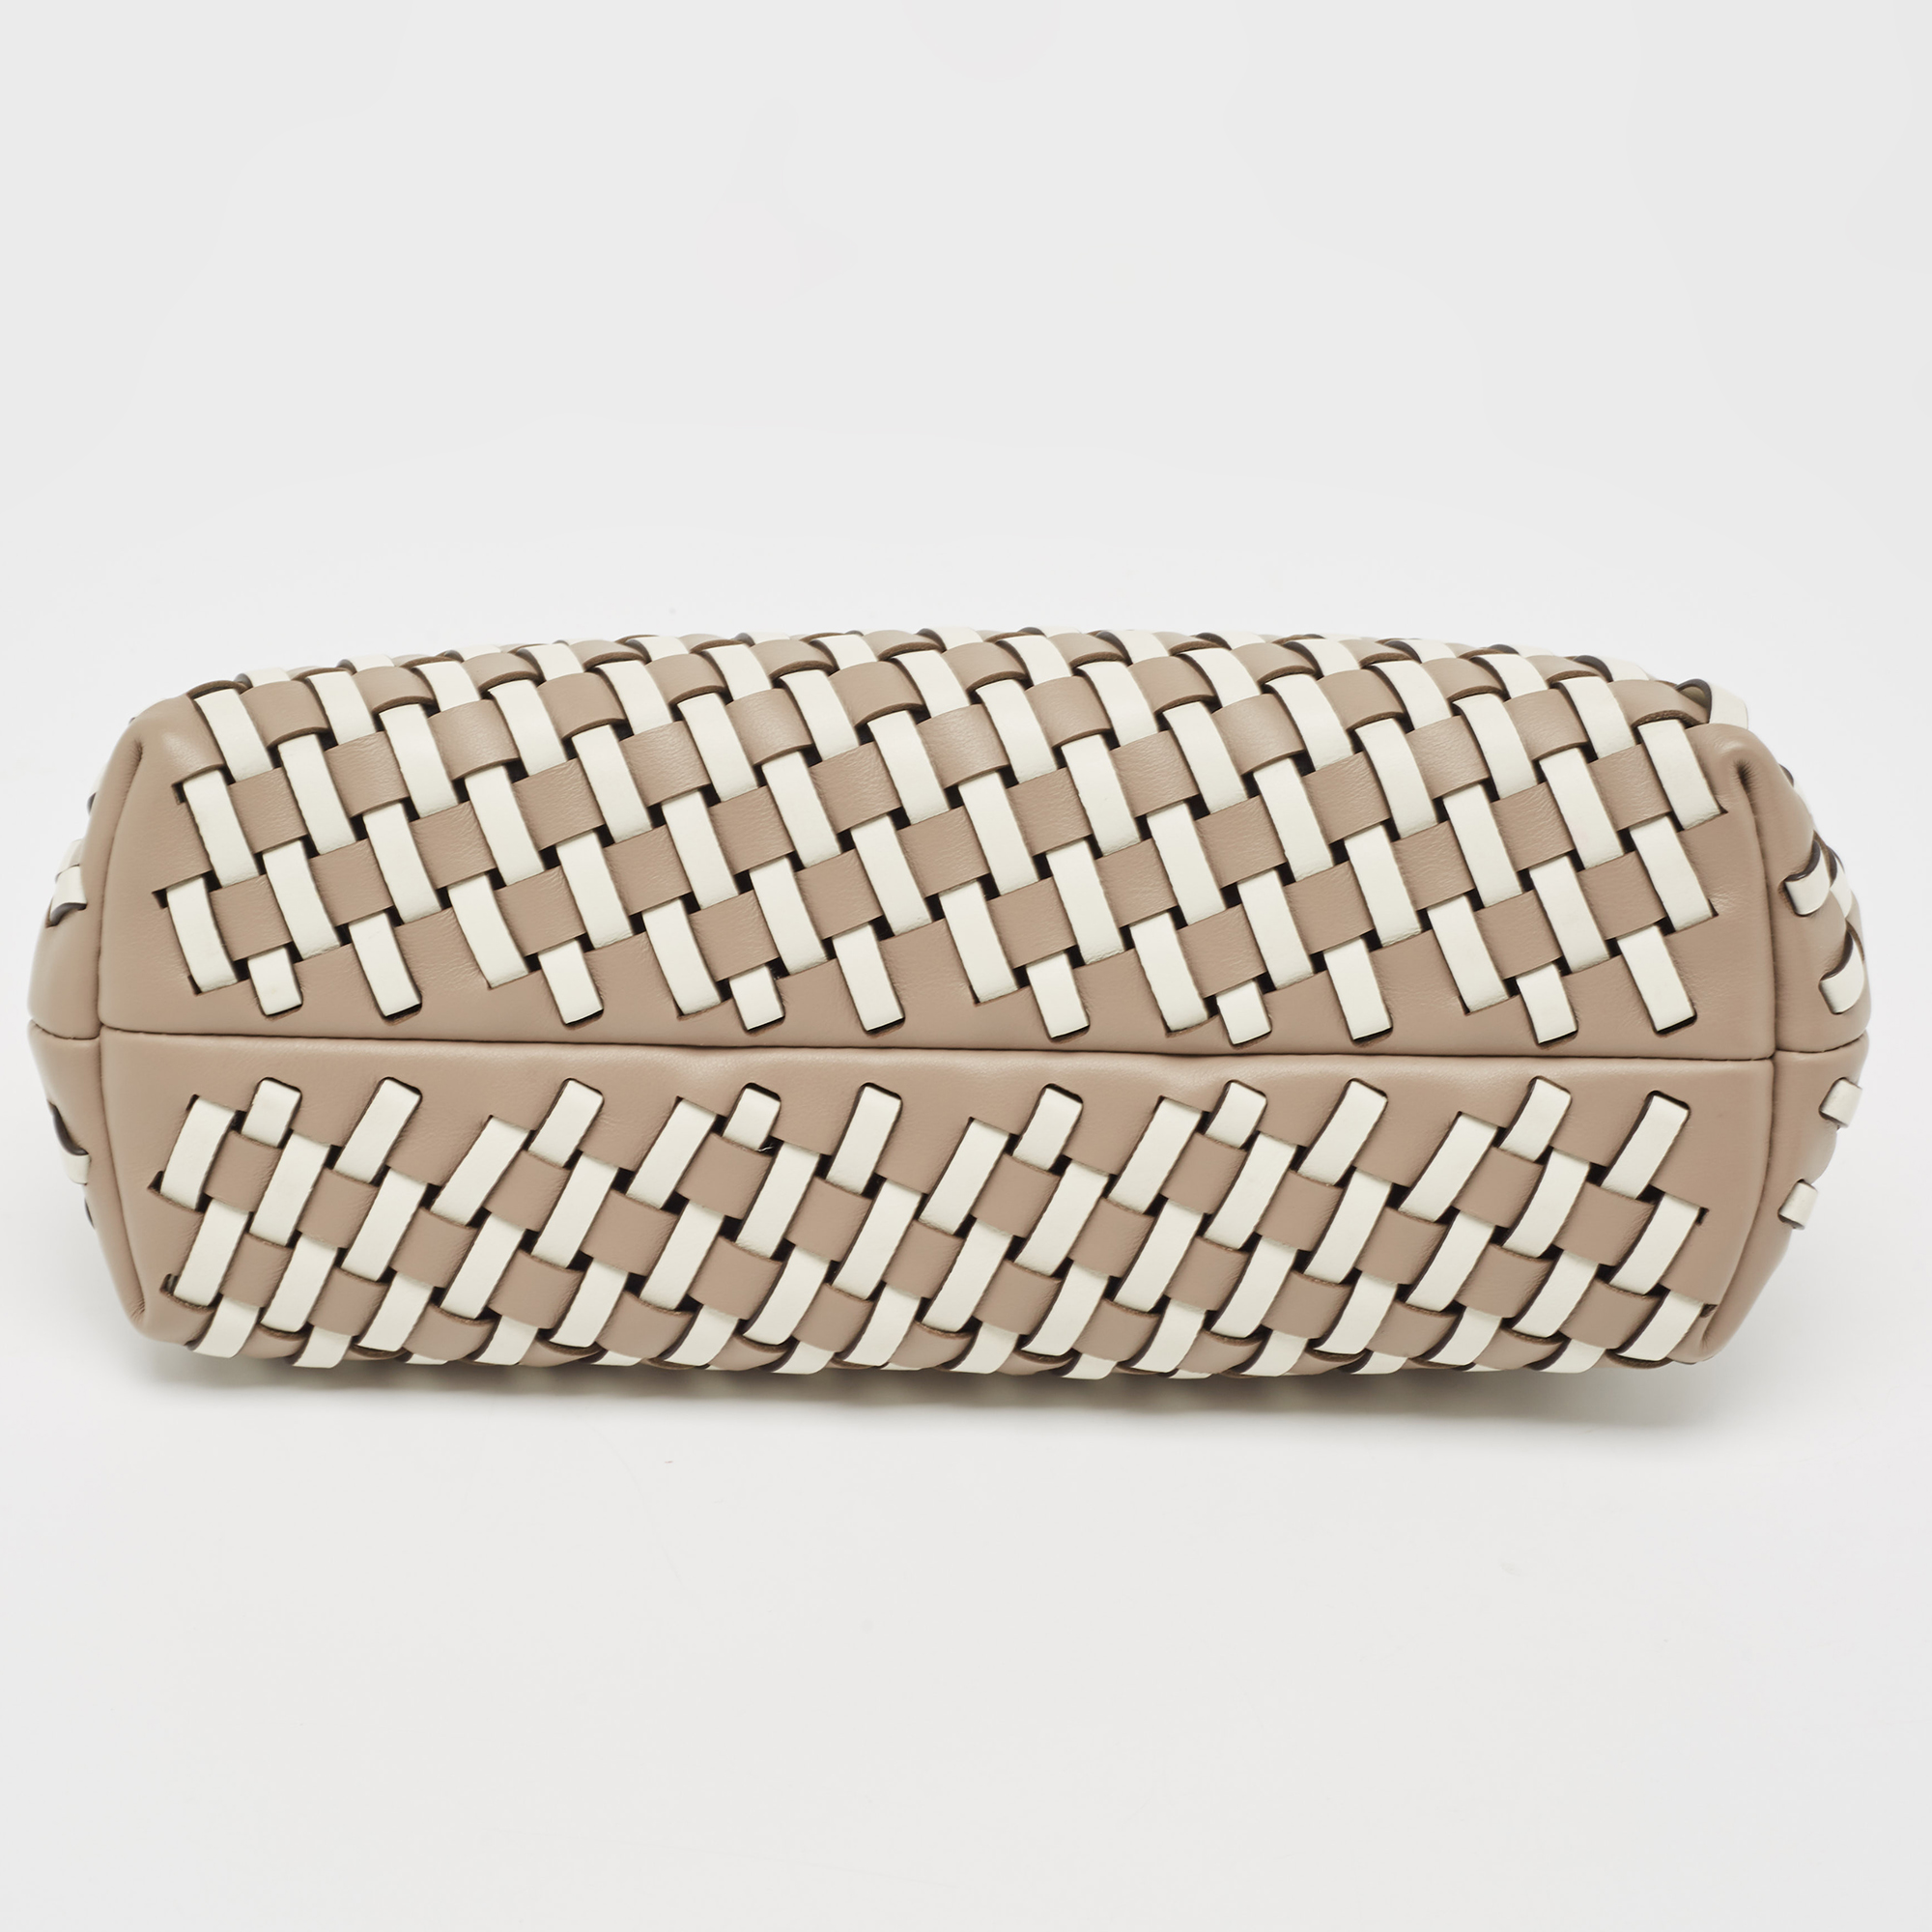 Fendi Beige/White Woven Leather Small First Shoulder Bag